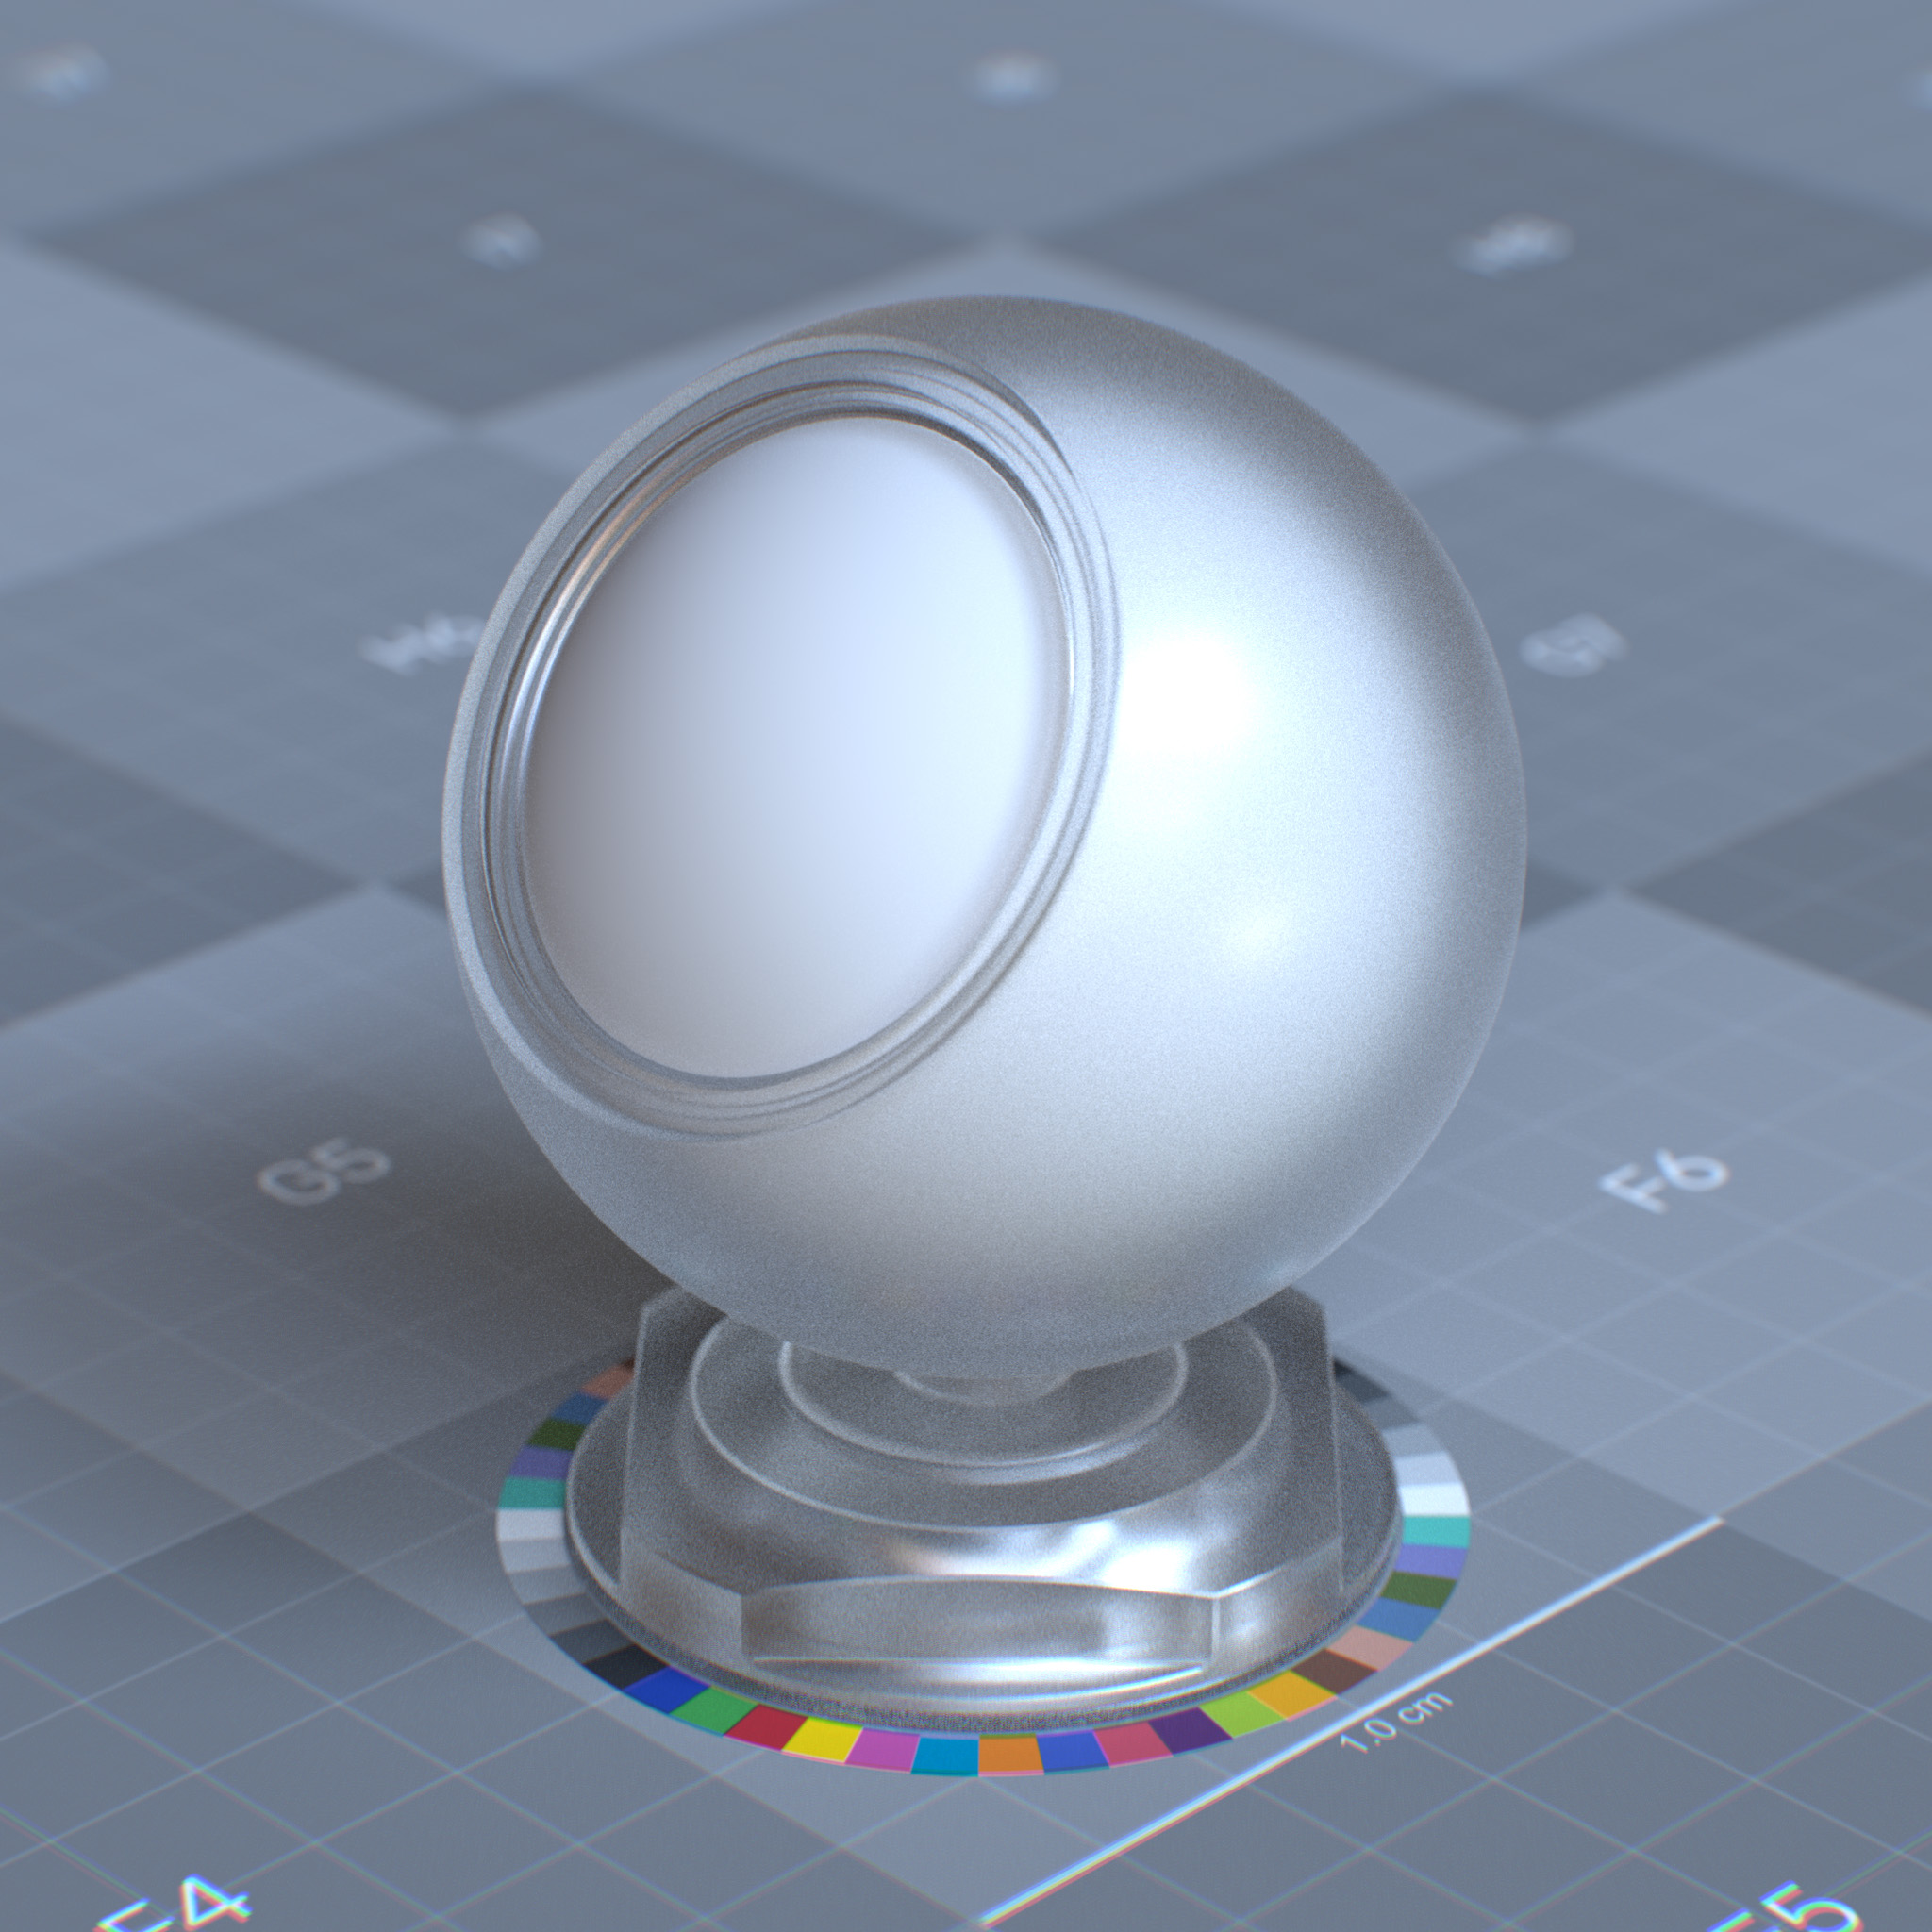 rtx_material_omnisurfacebase_specular_reflection_roughness_0p25_refraction